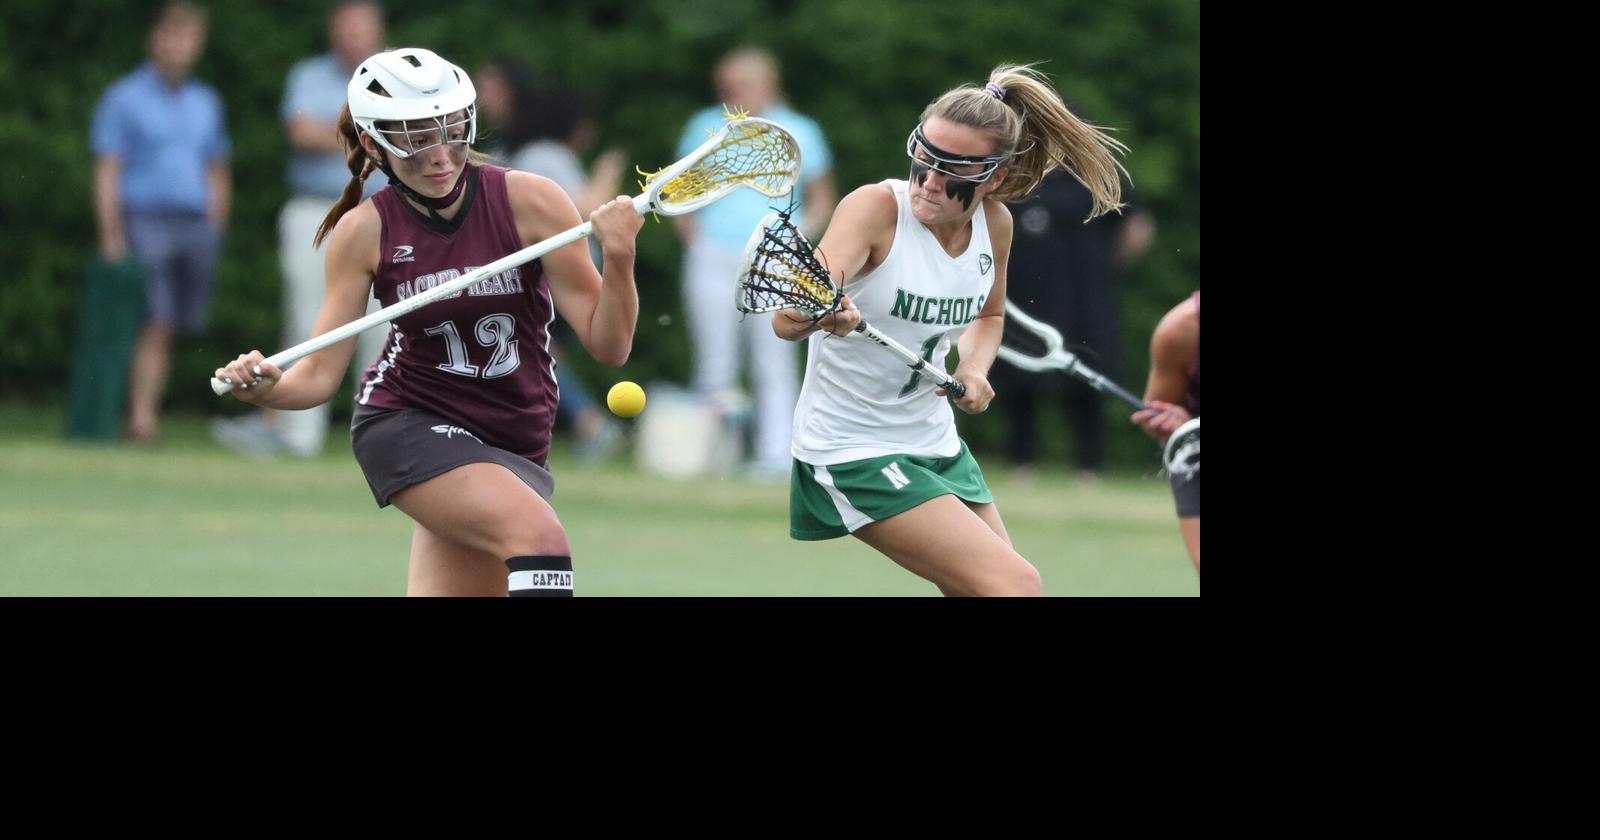 2021 girls lacrosse honor roll: All-stars from all over WNY